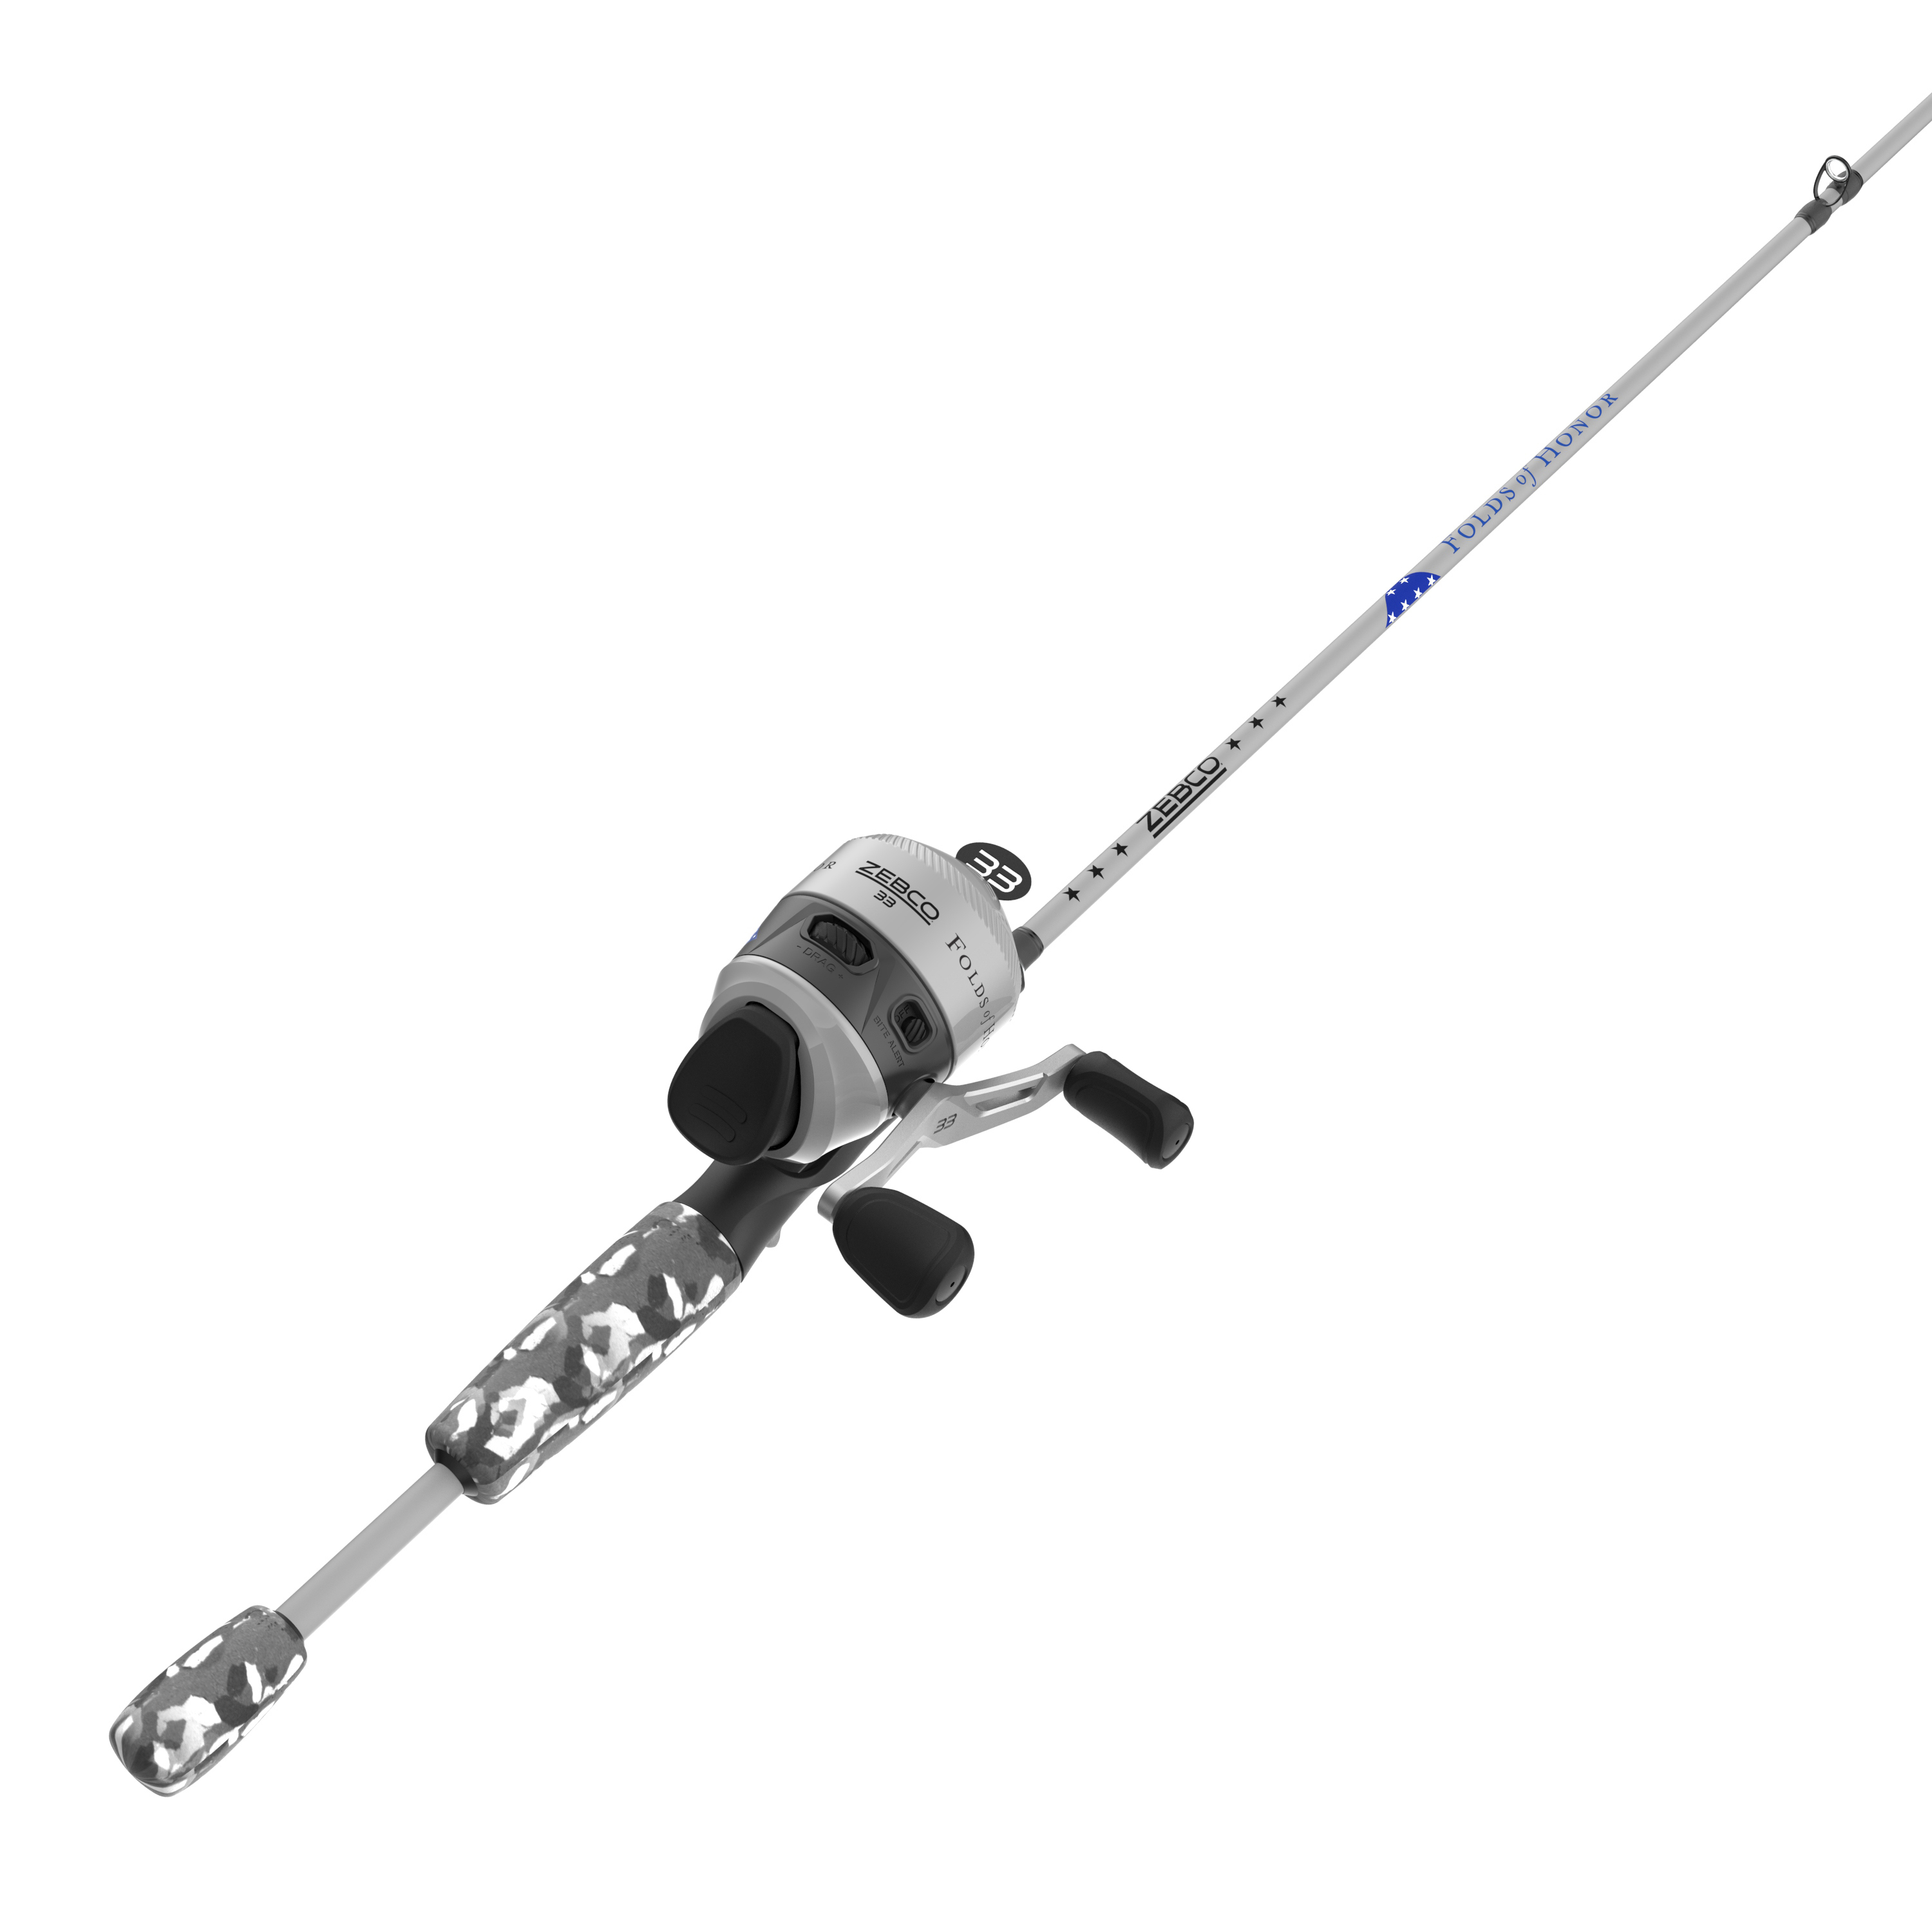 Special Edition USA Fishing Combo, 33 Folds of Honor